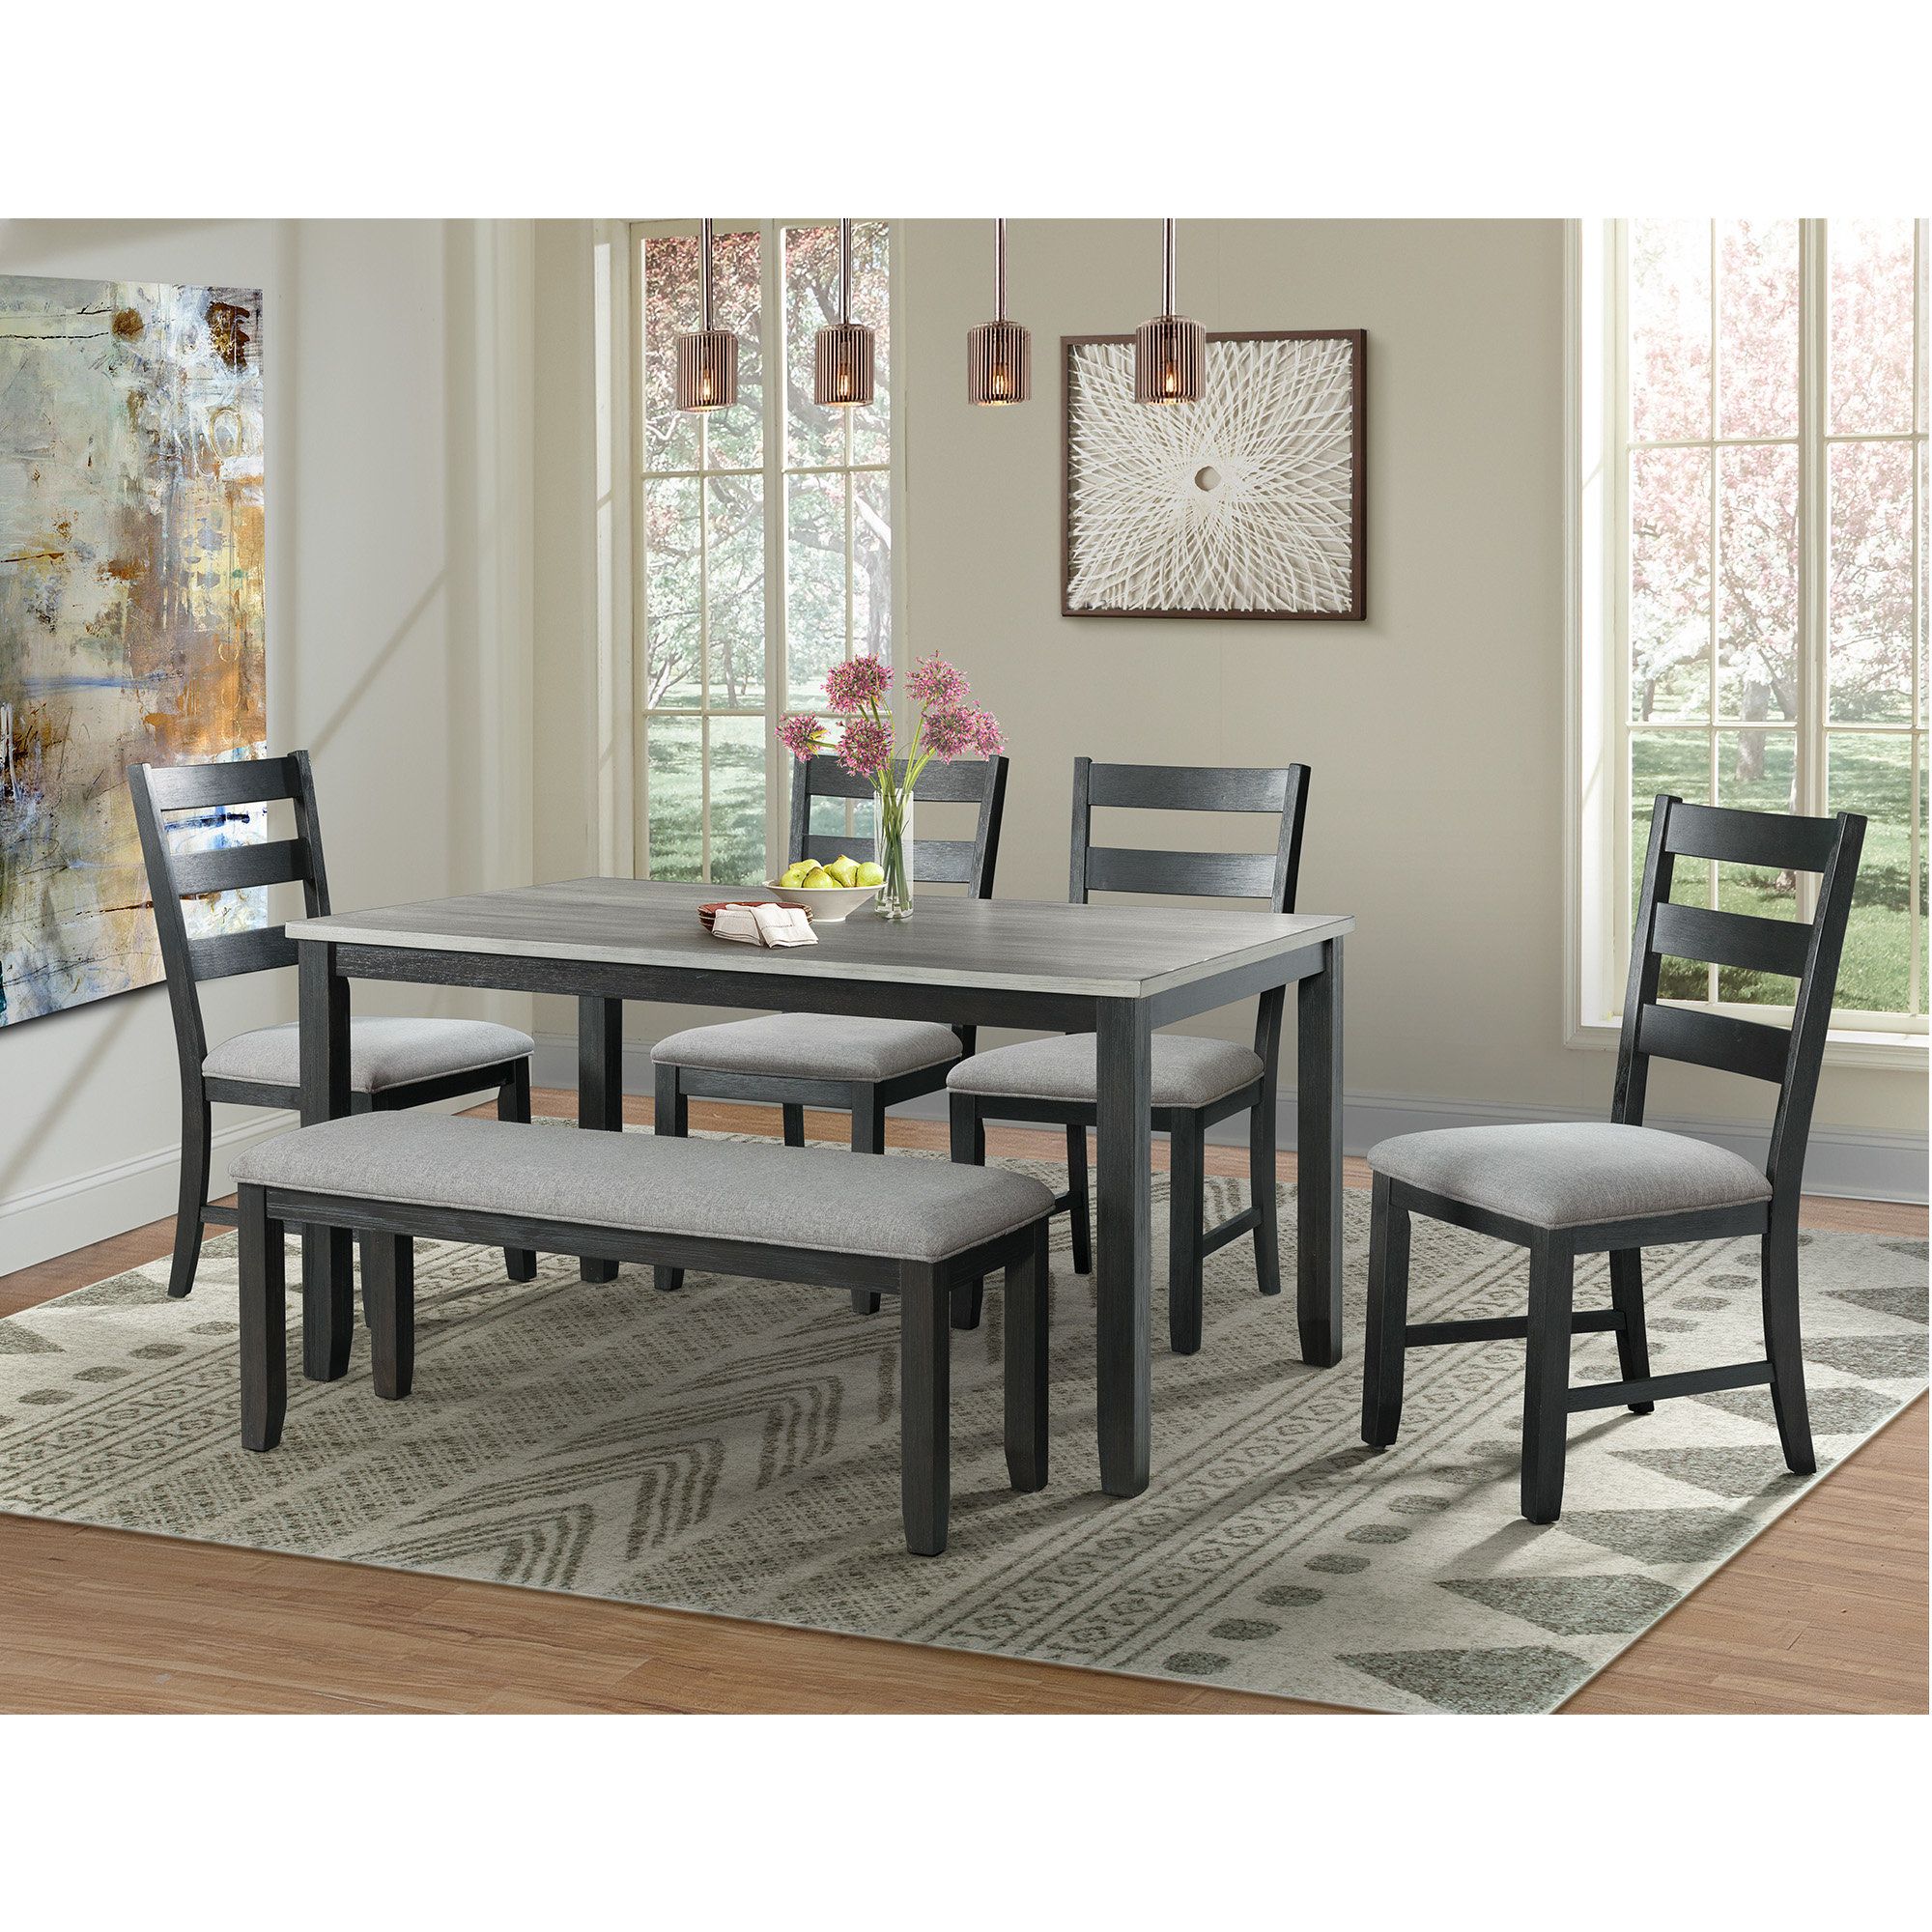 Most Recent Alcott Hill Mavis 6 Piece Solid Wood Dining Set & Reviews (View 15 of 25)